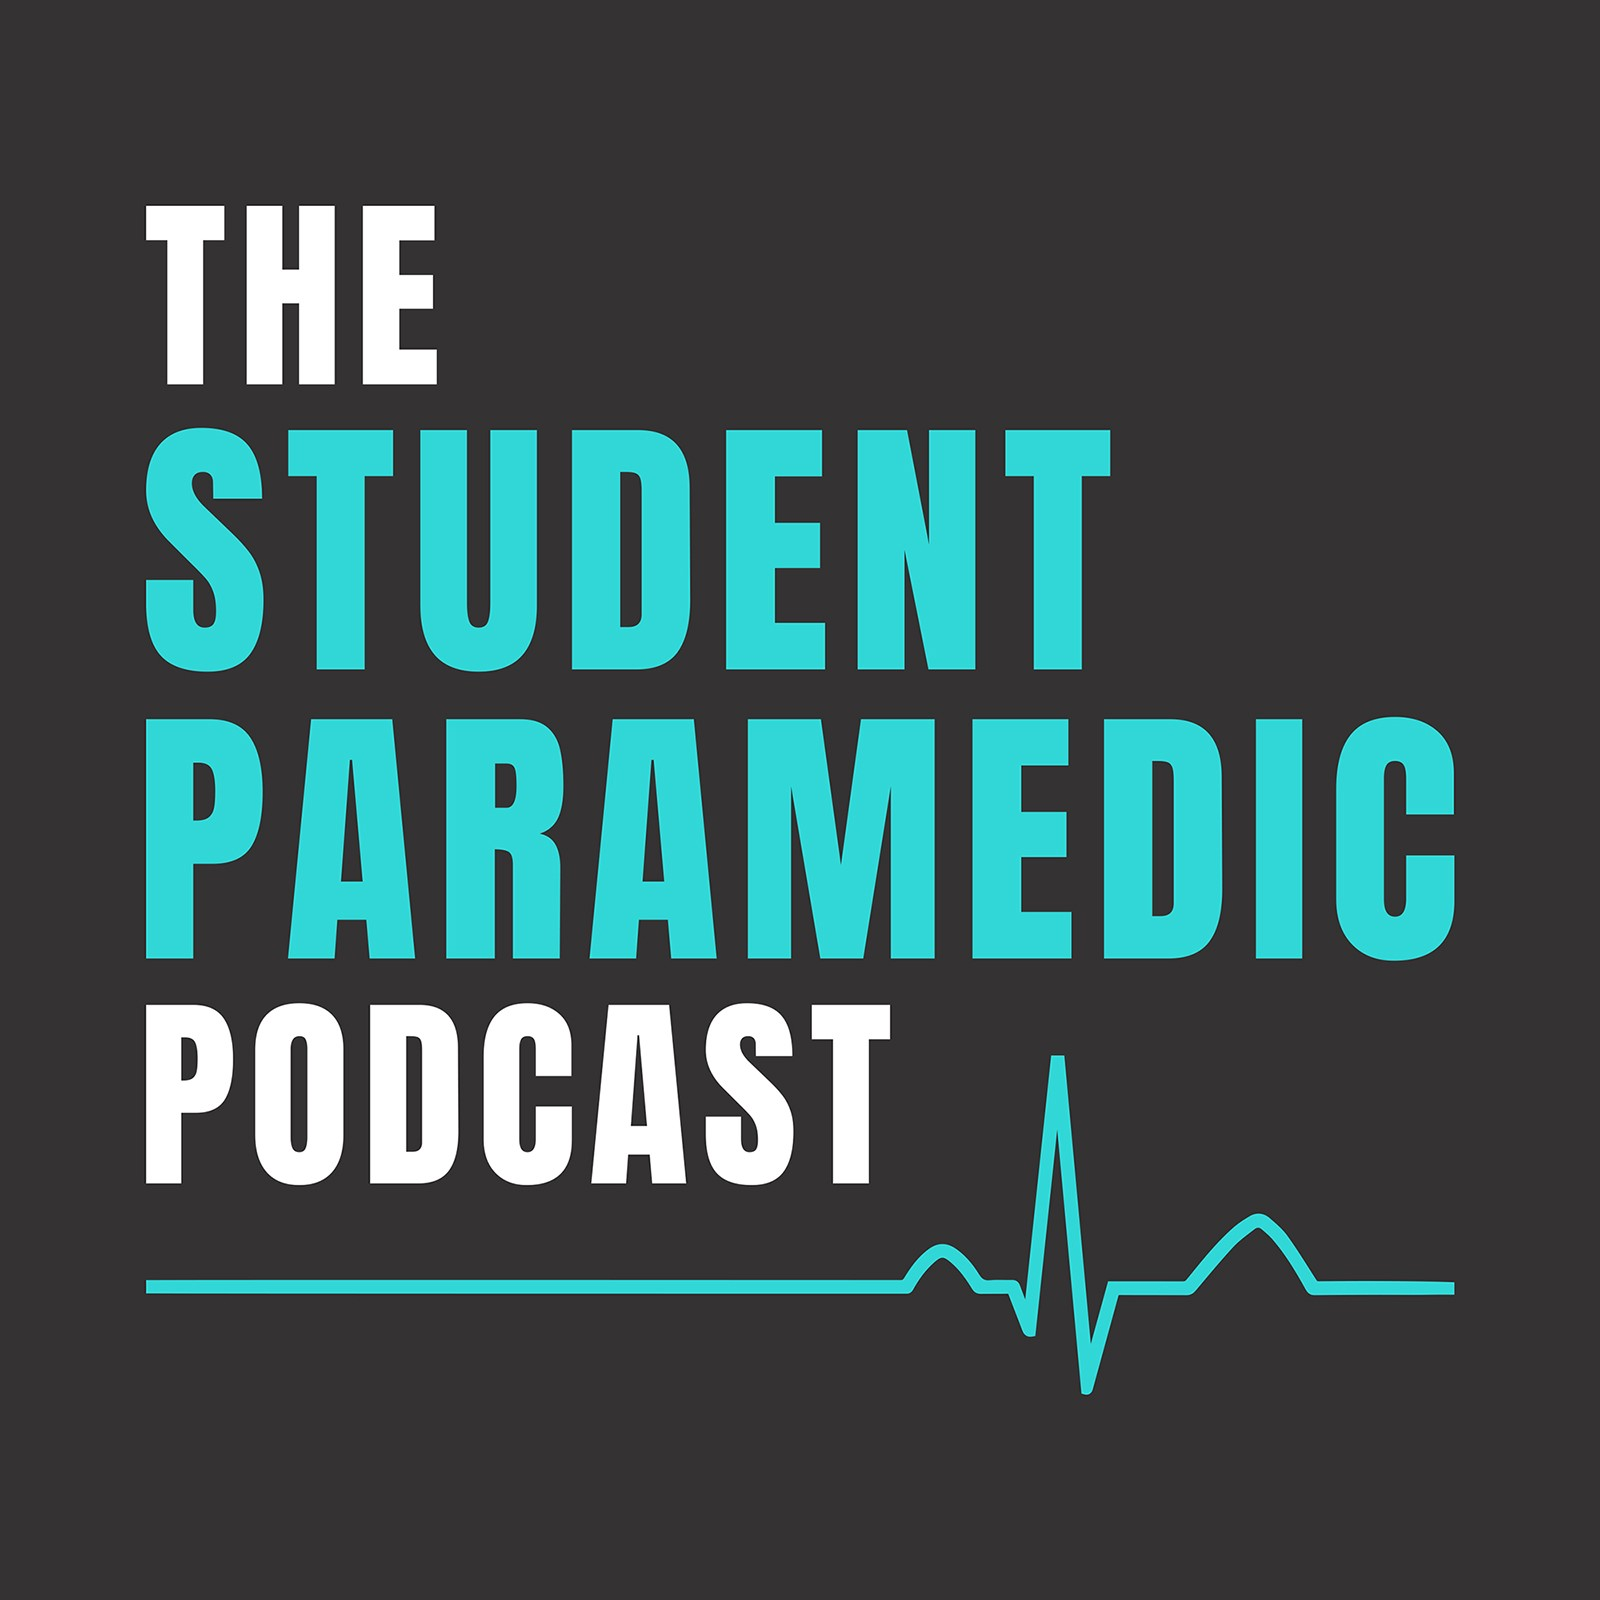 What can a career in paramedicine look like? w/ Andy Bell